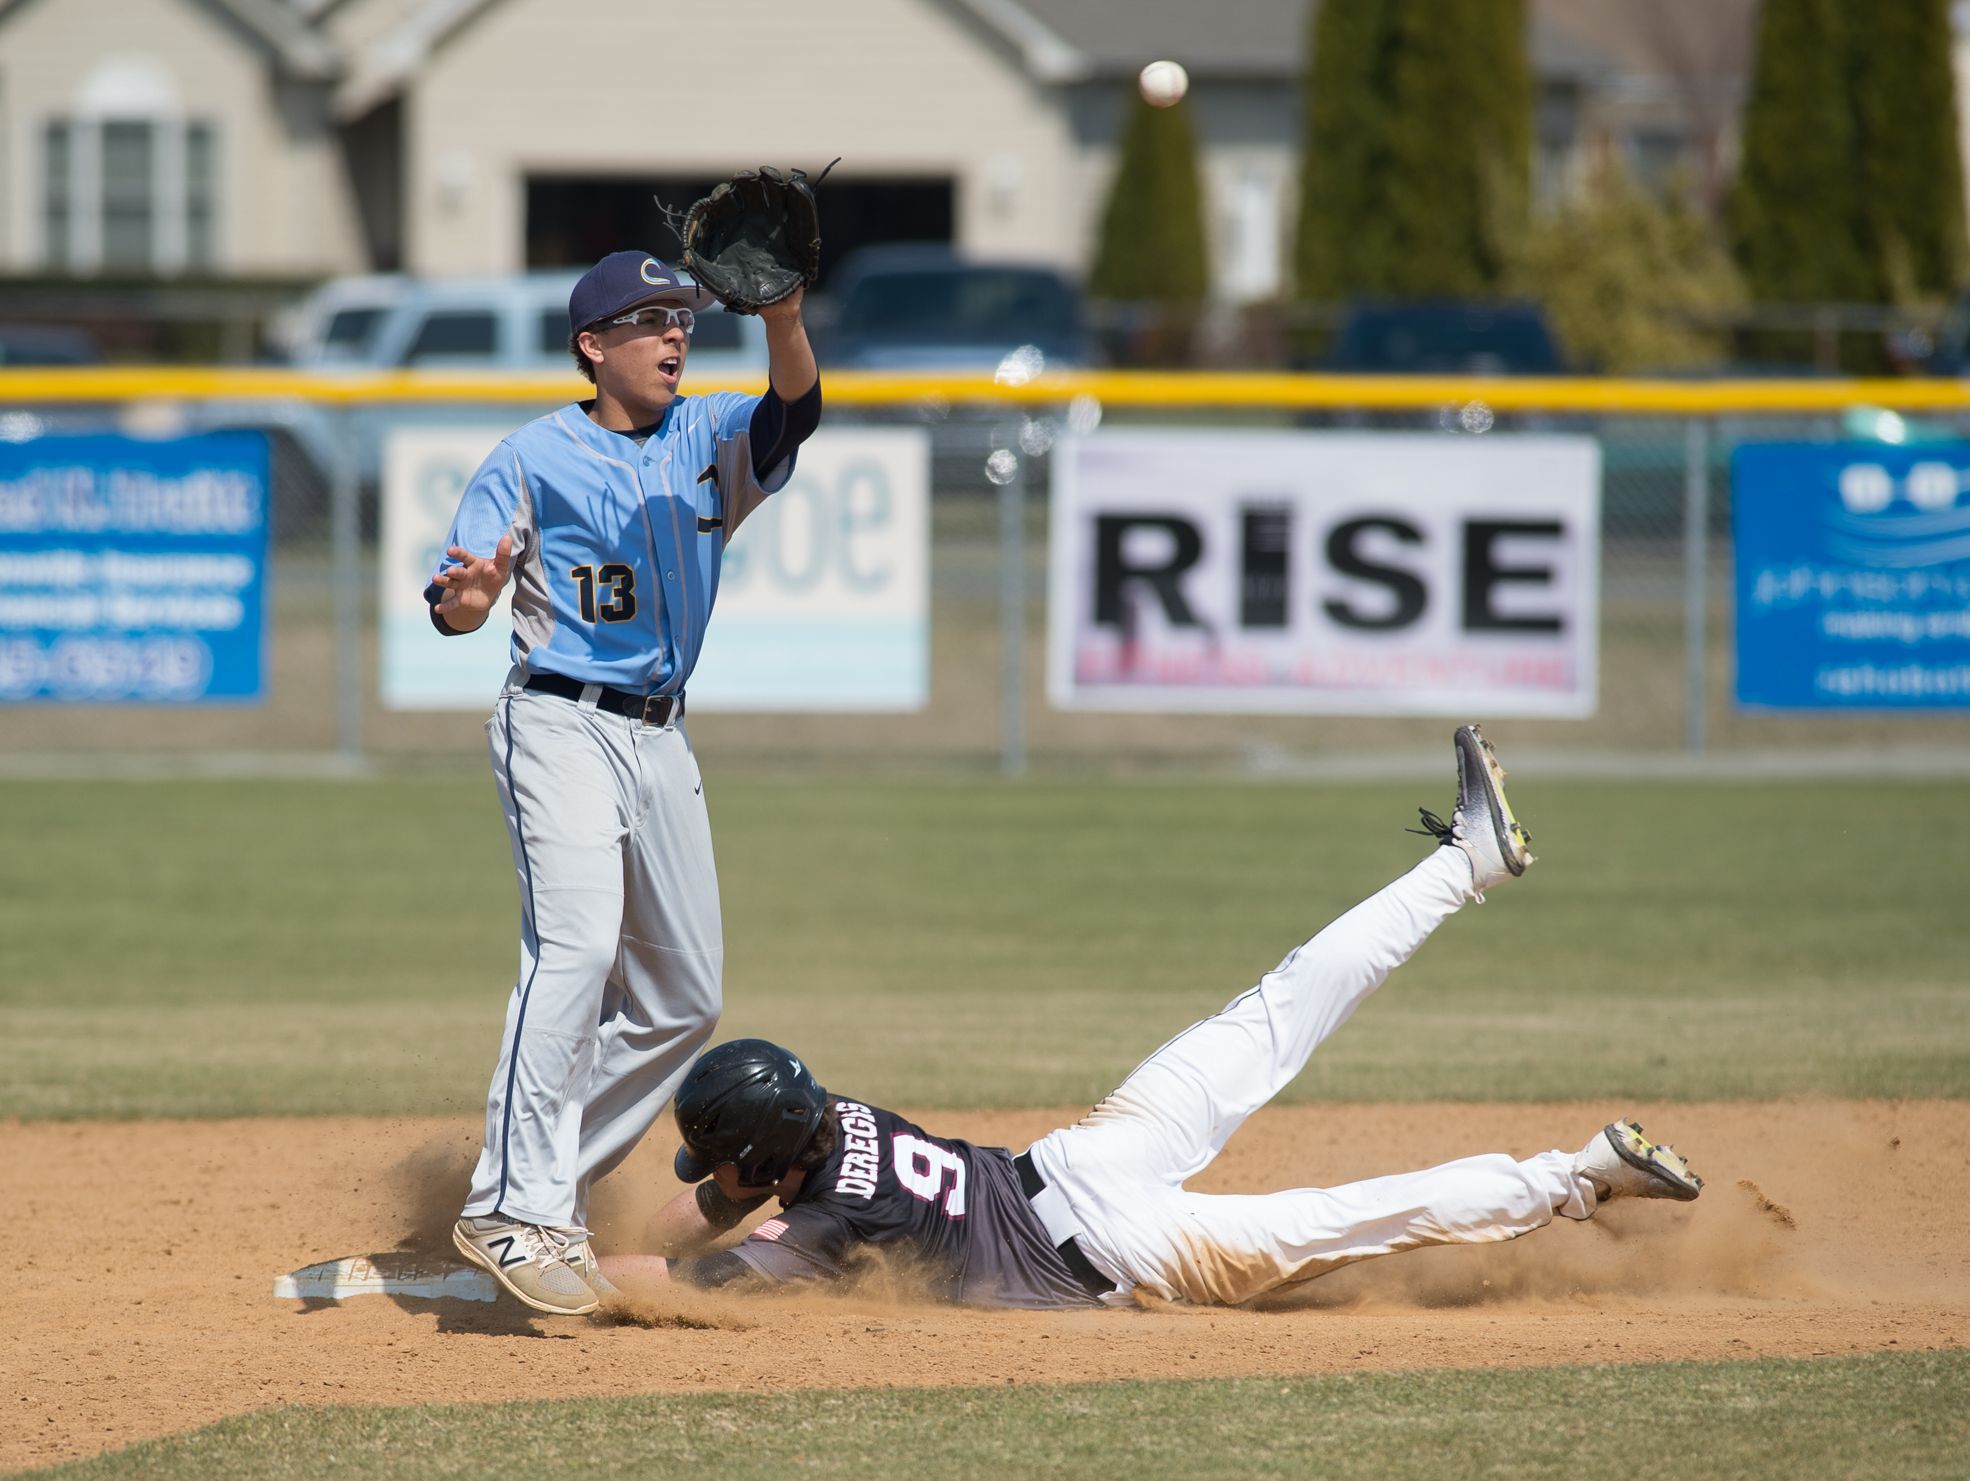 Caravel’s Ethan deRegis (9) slides into second base as the ball is thrown to Cape Henlopen’s Dwayne Harmon (13).